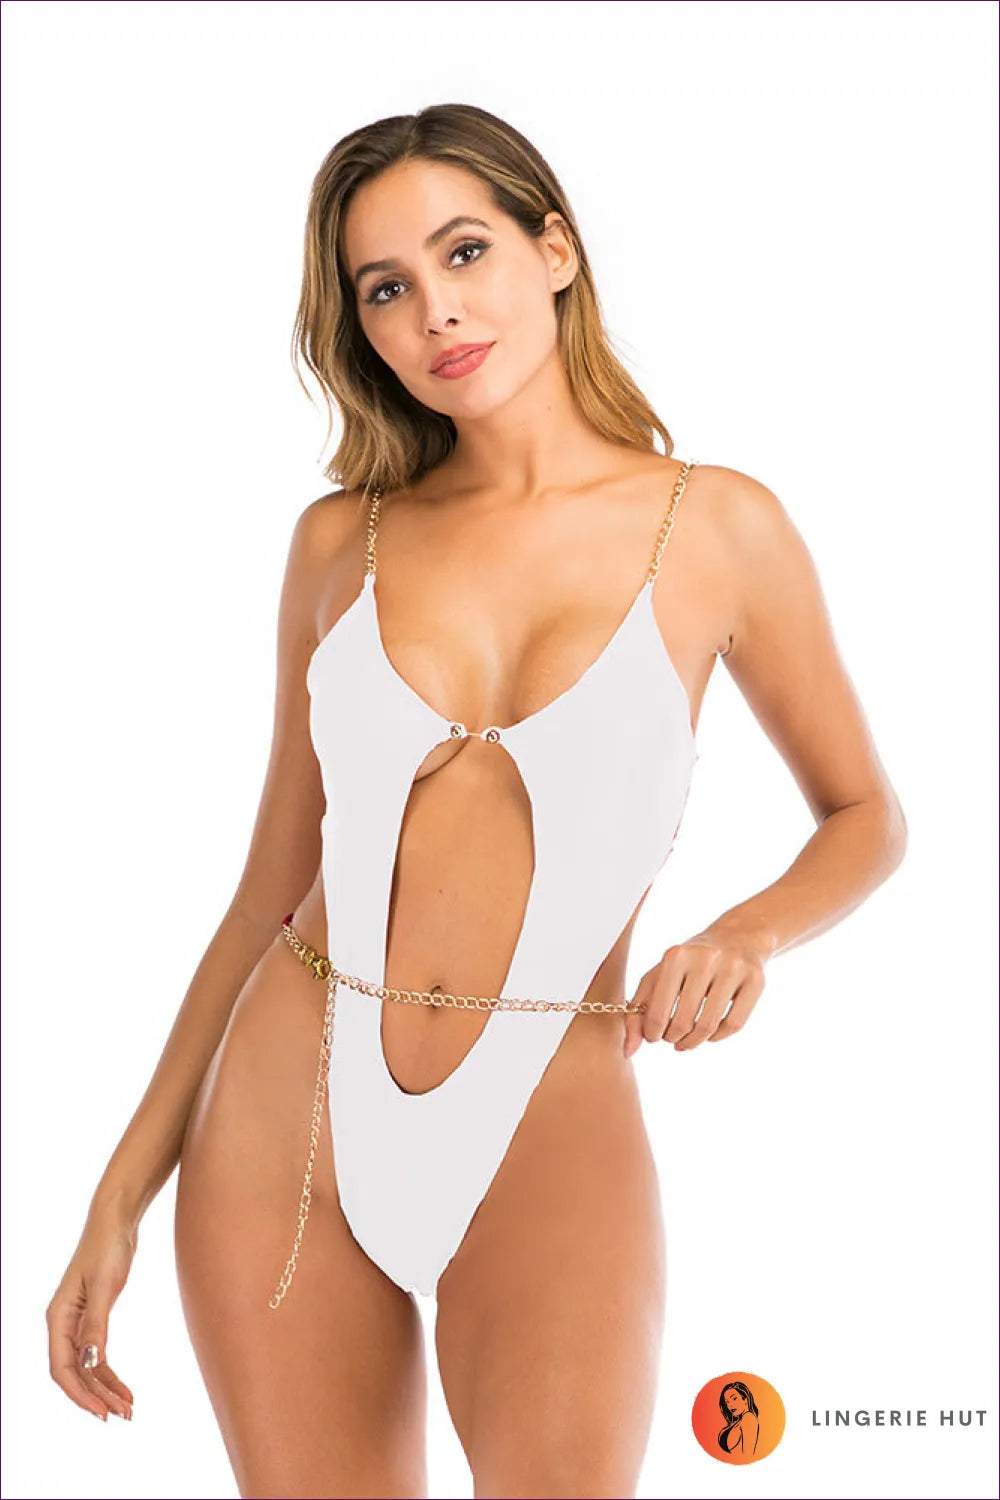 Be The Beach Belle In This Sexy Boho Swimsuit With Chain Detailing And Seductive Cutouts! Dive Into Summer